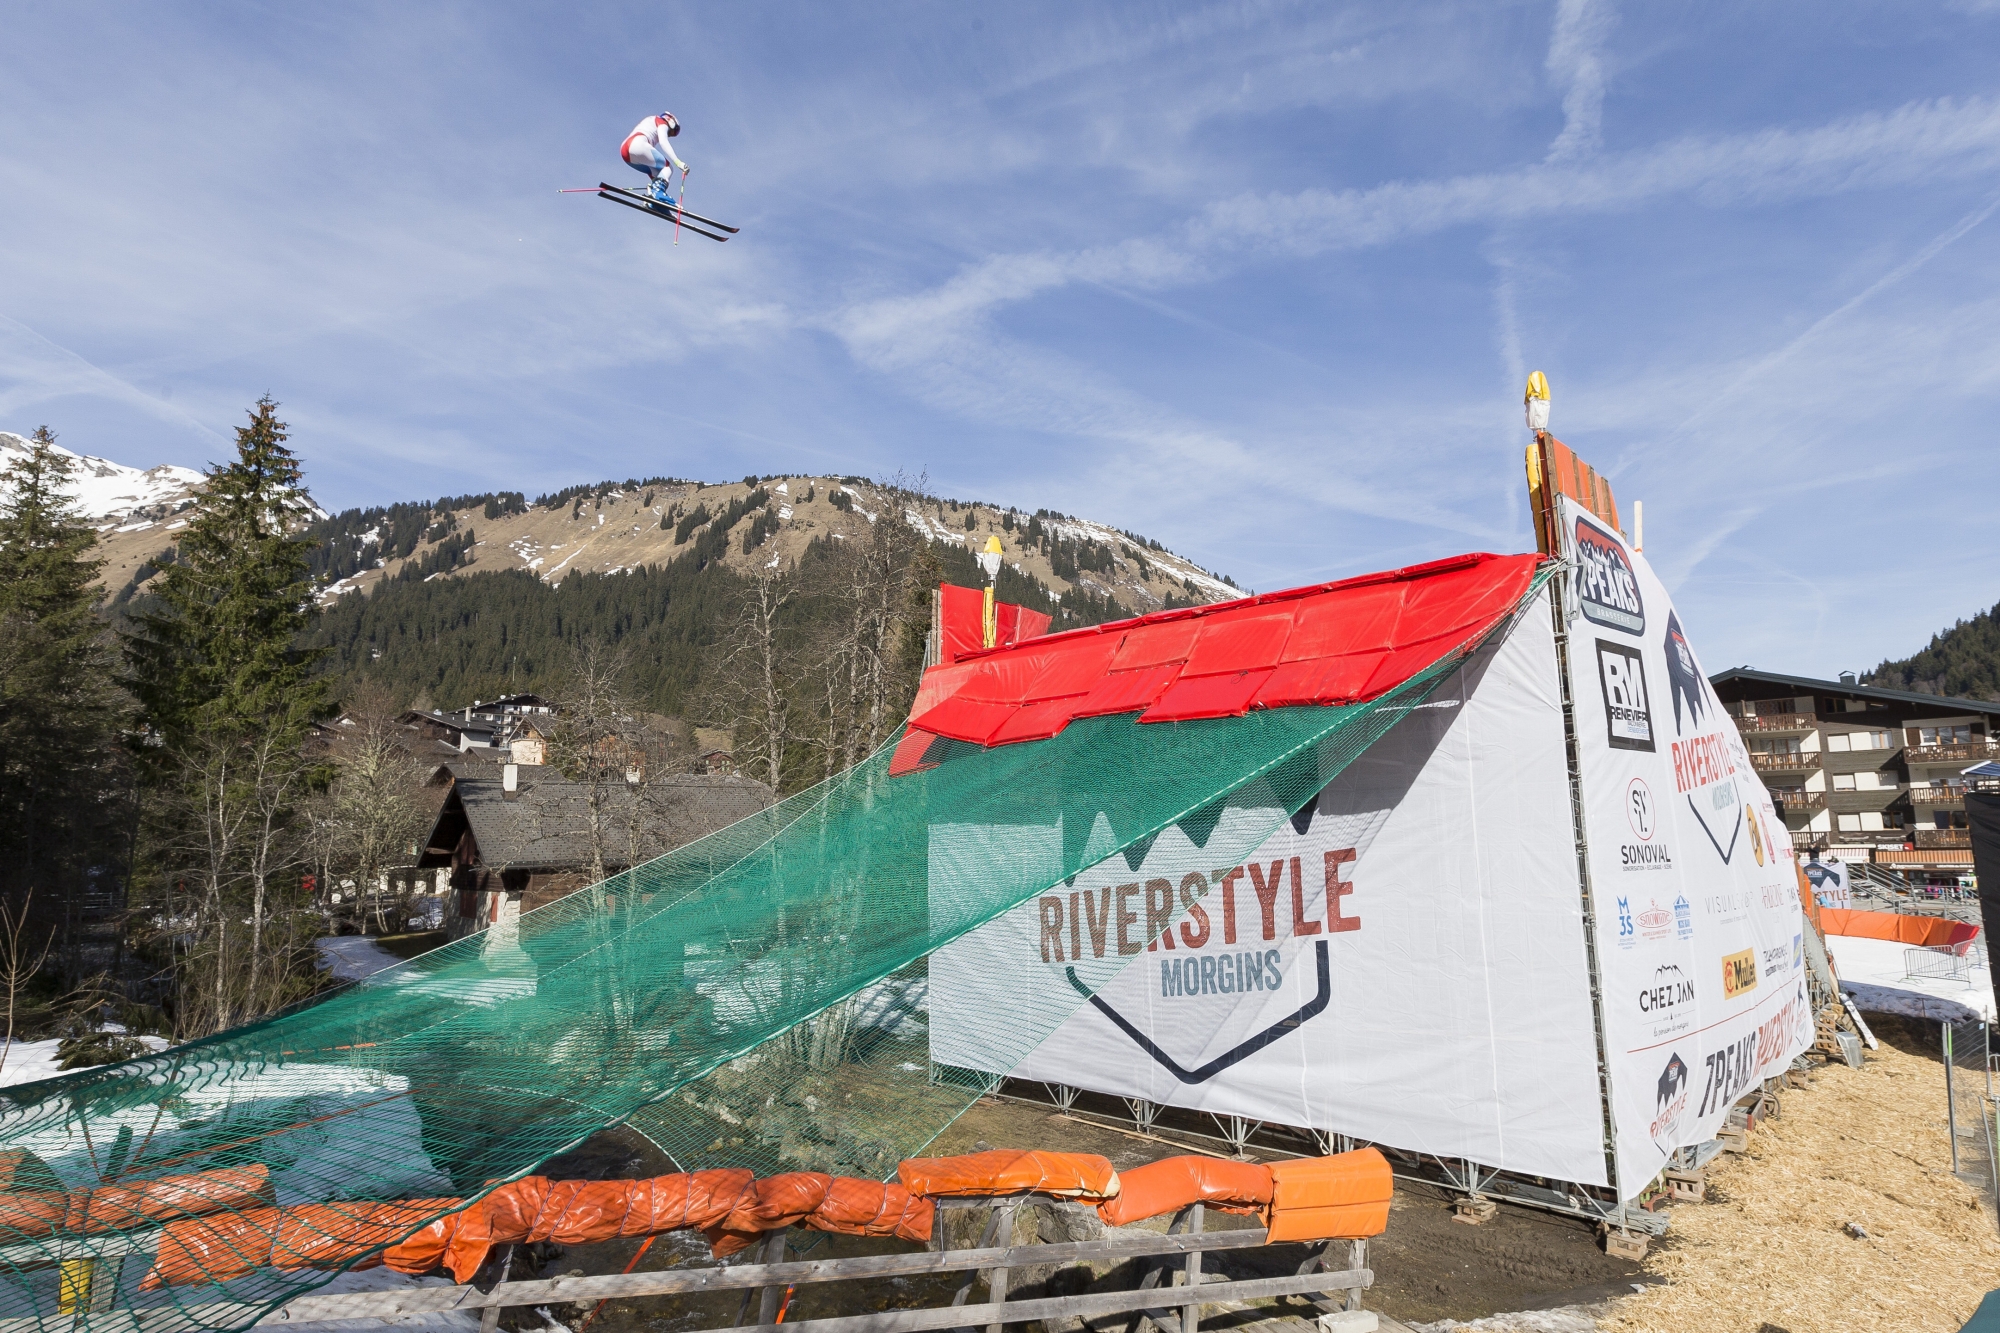 Former ski alpin racer and 2010 Olympic champion Swiss Didier Defago leaps over the river Vieze during the 2nd edition of the 7Peaks Riverstyle in Morgins, Switzerland Thursday, March 30, 2017. The 7Peaks Riverstyle is a freestyle ski competition in the Swiss aples. (KEYSTONE/Cyril Zingaro) SWITZERLAND CP 7PEAKS RIVERSTYLE